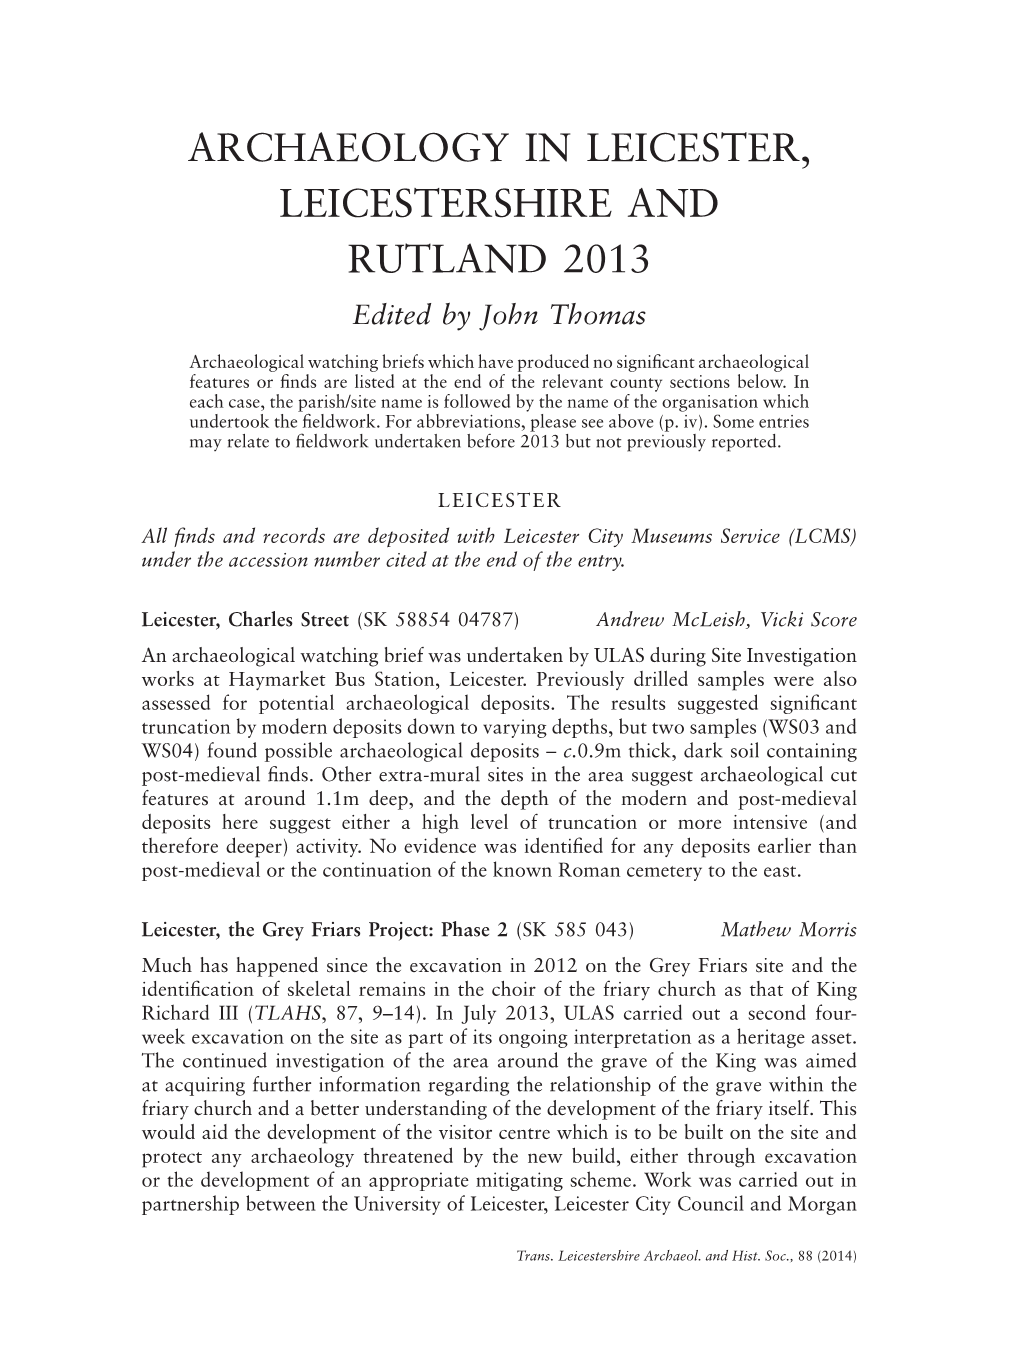 ARCHAEOLOGY in LEICESTER, LEICESTERSHIRE and RUTLAND 2013 Edited by John Thomas